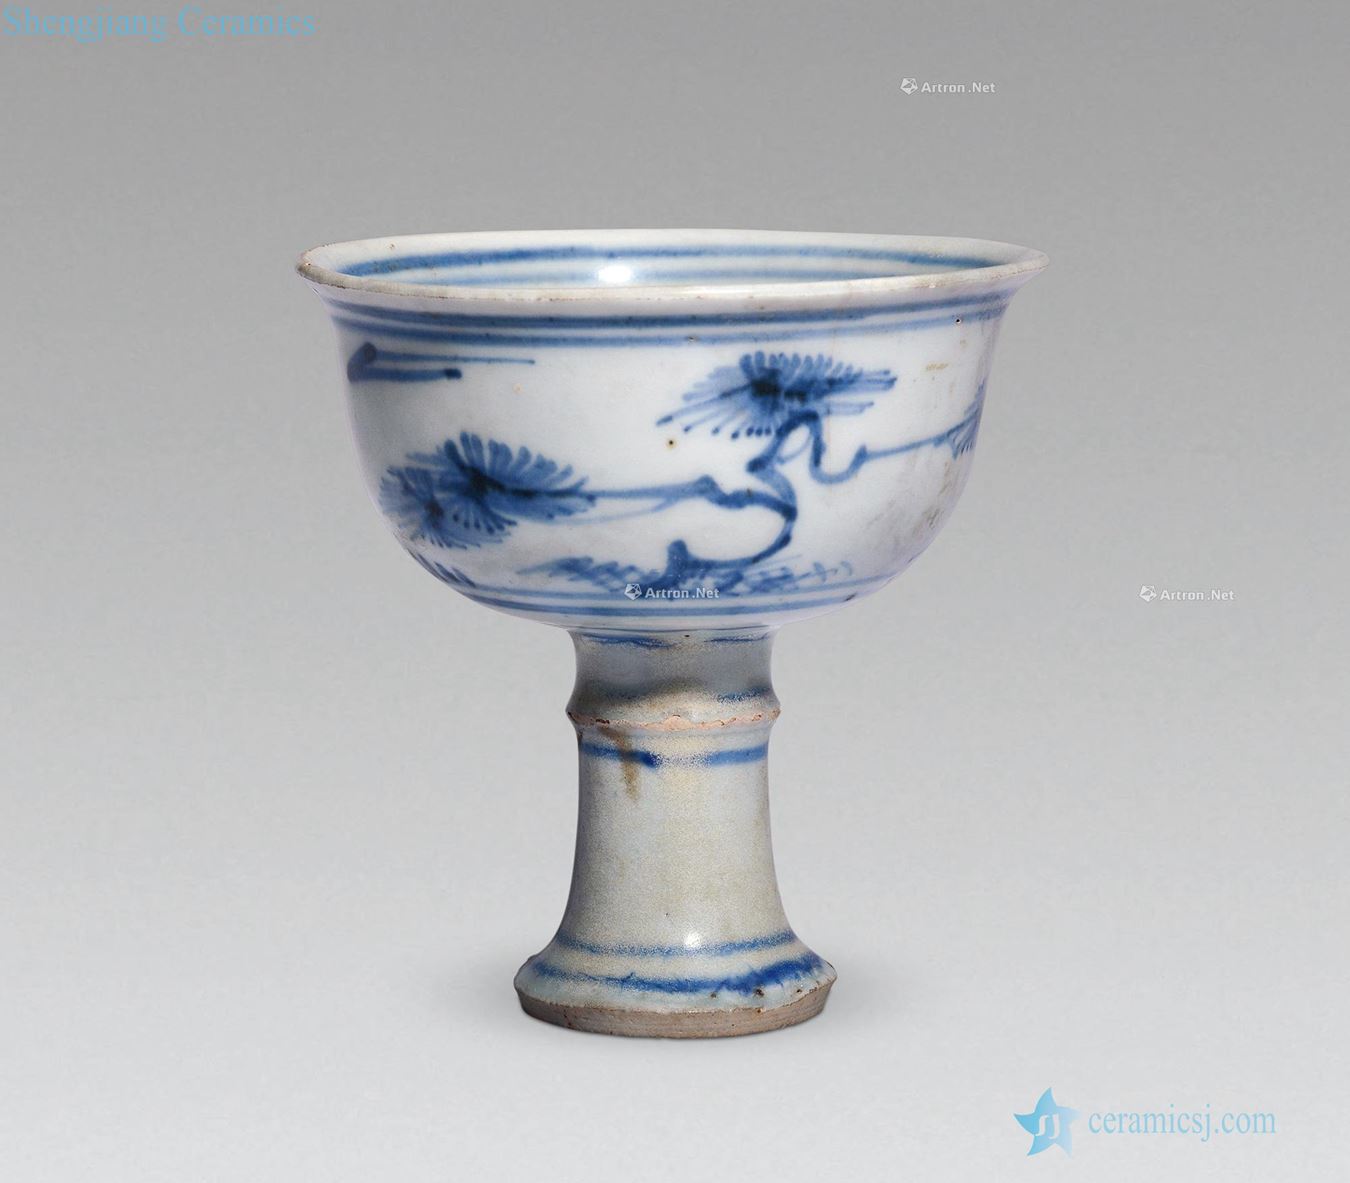 The yuan dynasty blue and white footed cup